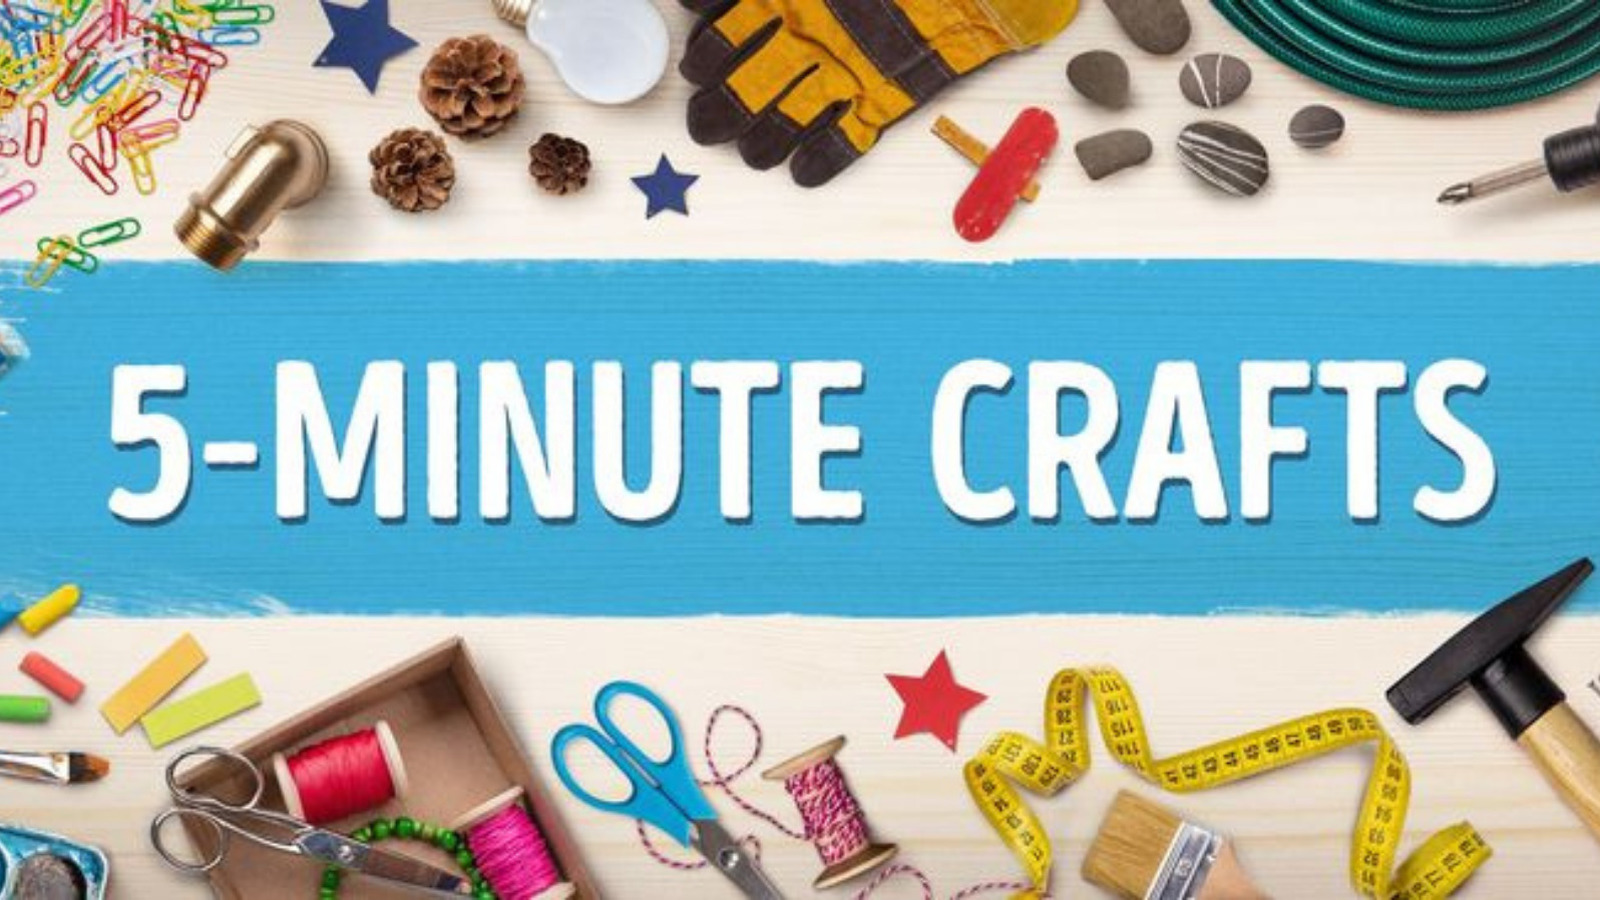 What are the benefits of 5 minute crafts?